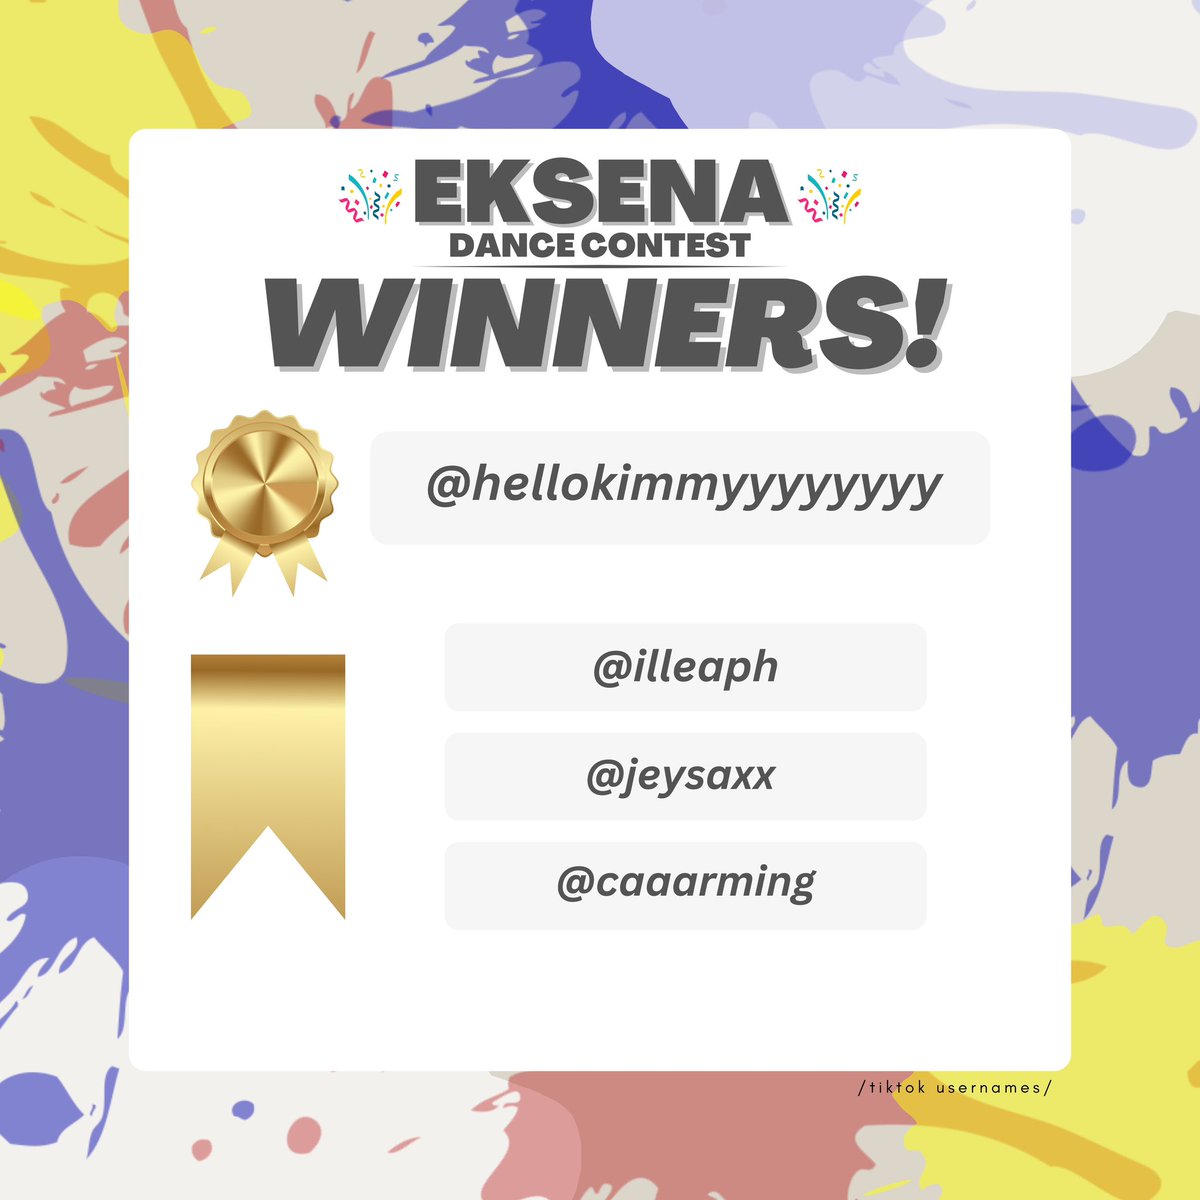 📢 EKSENA Dance Contest Winners! 📢 Big congrats to @hellokimmyyyyyyy for grabbing the top spot. And of course, let’s not forget our awesome runners-up, @illeaph, @jeysaxx, and @caaarming! 🎉 Huge thanks to everyone who joined the Eksena Dance Contest! #YARA #YARA_PH